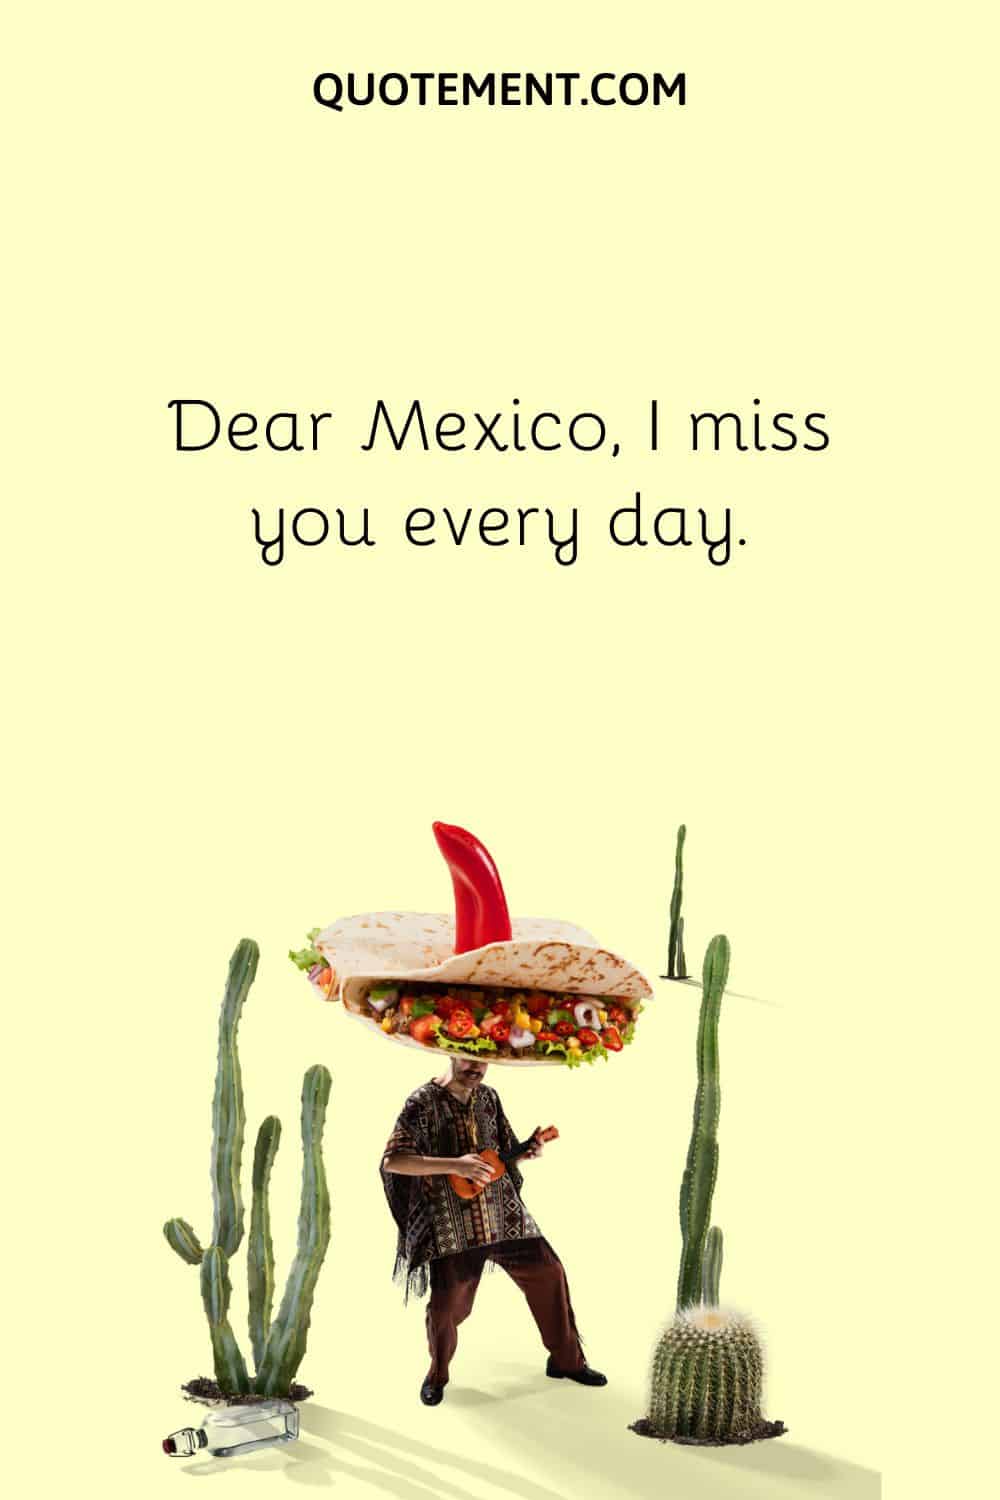 Dear Mexico, I miss you every day